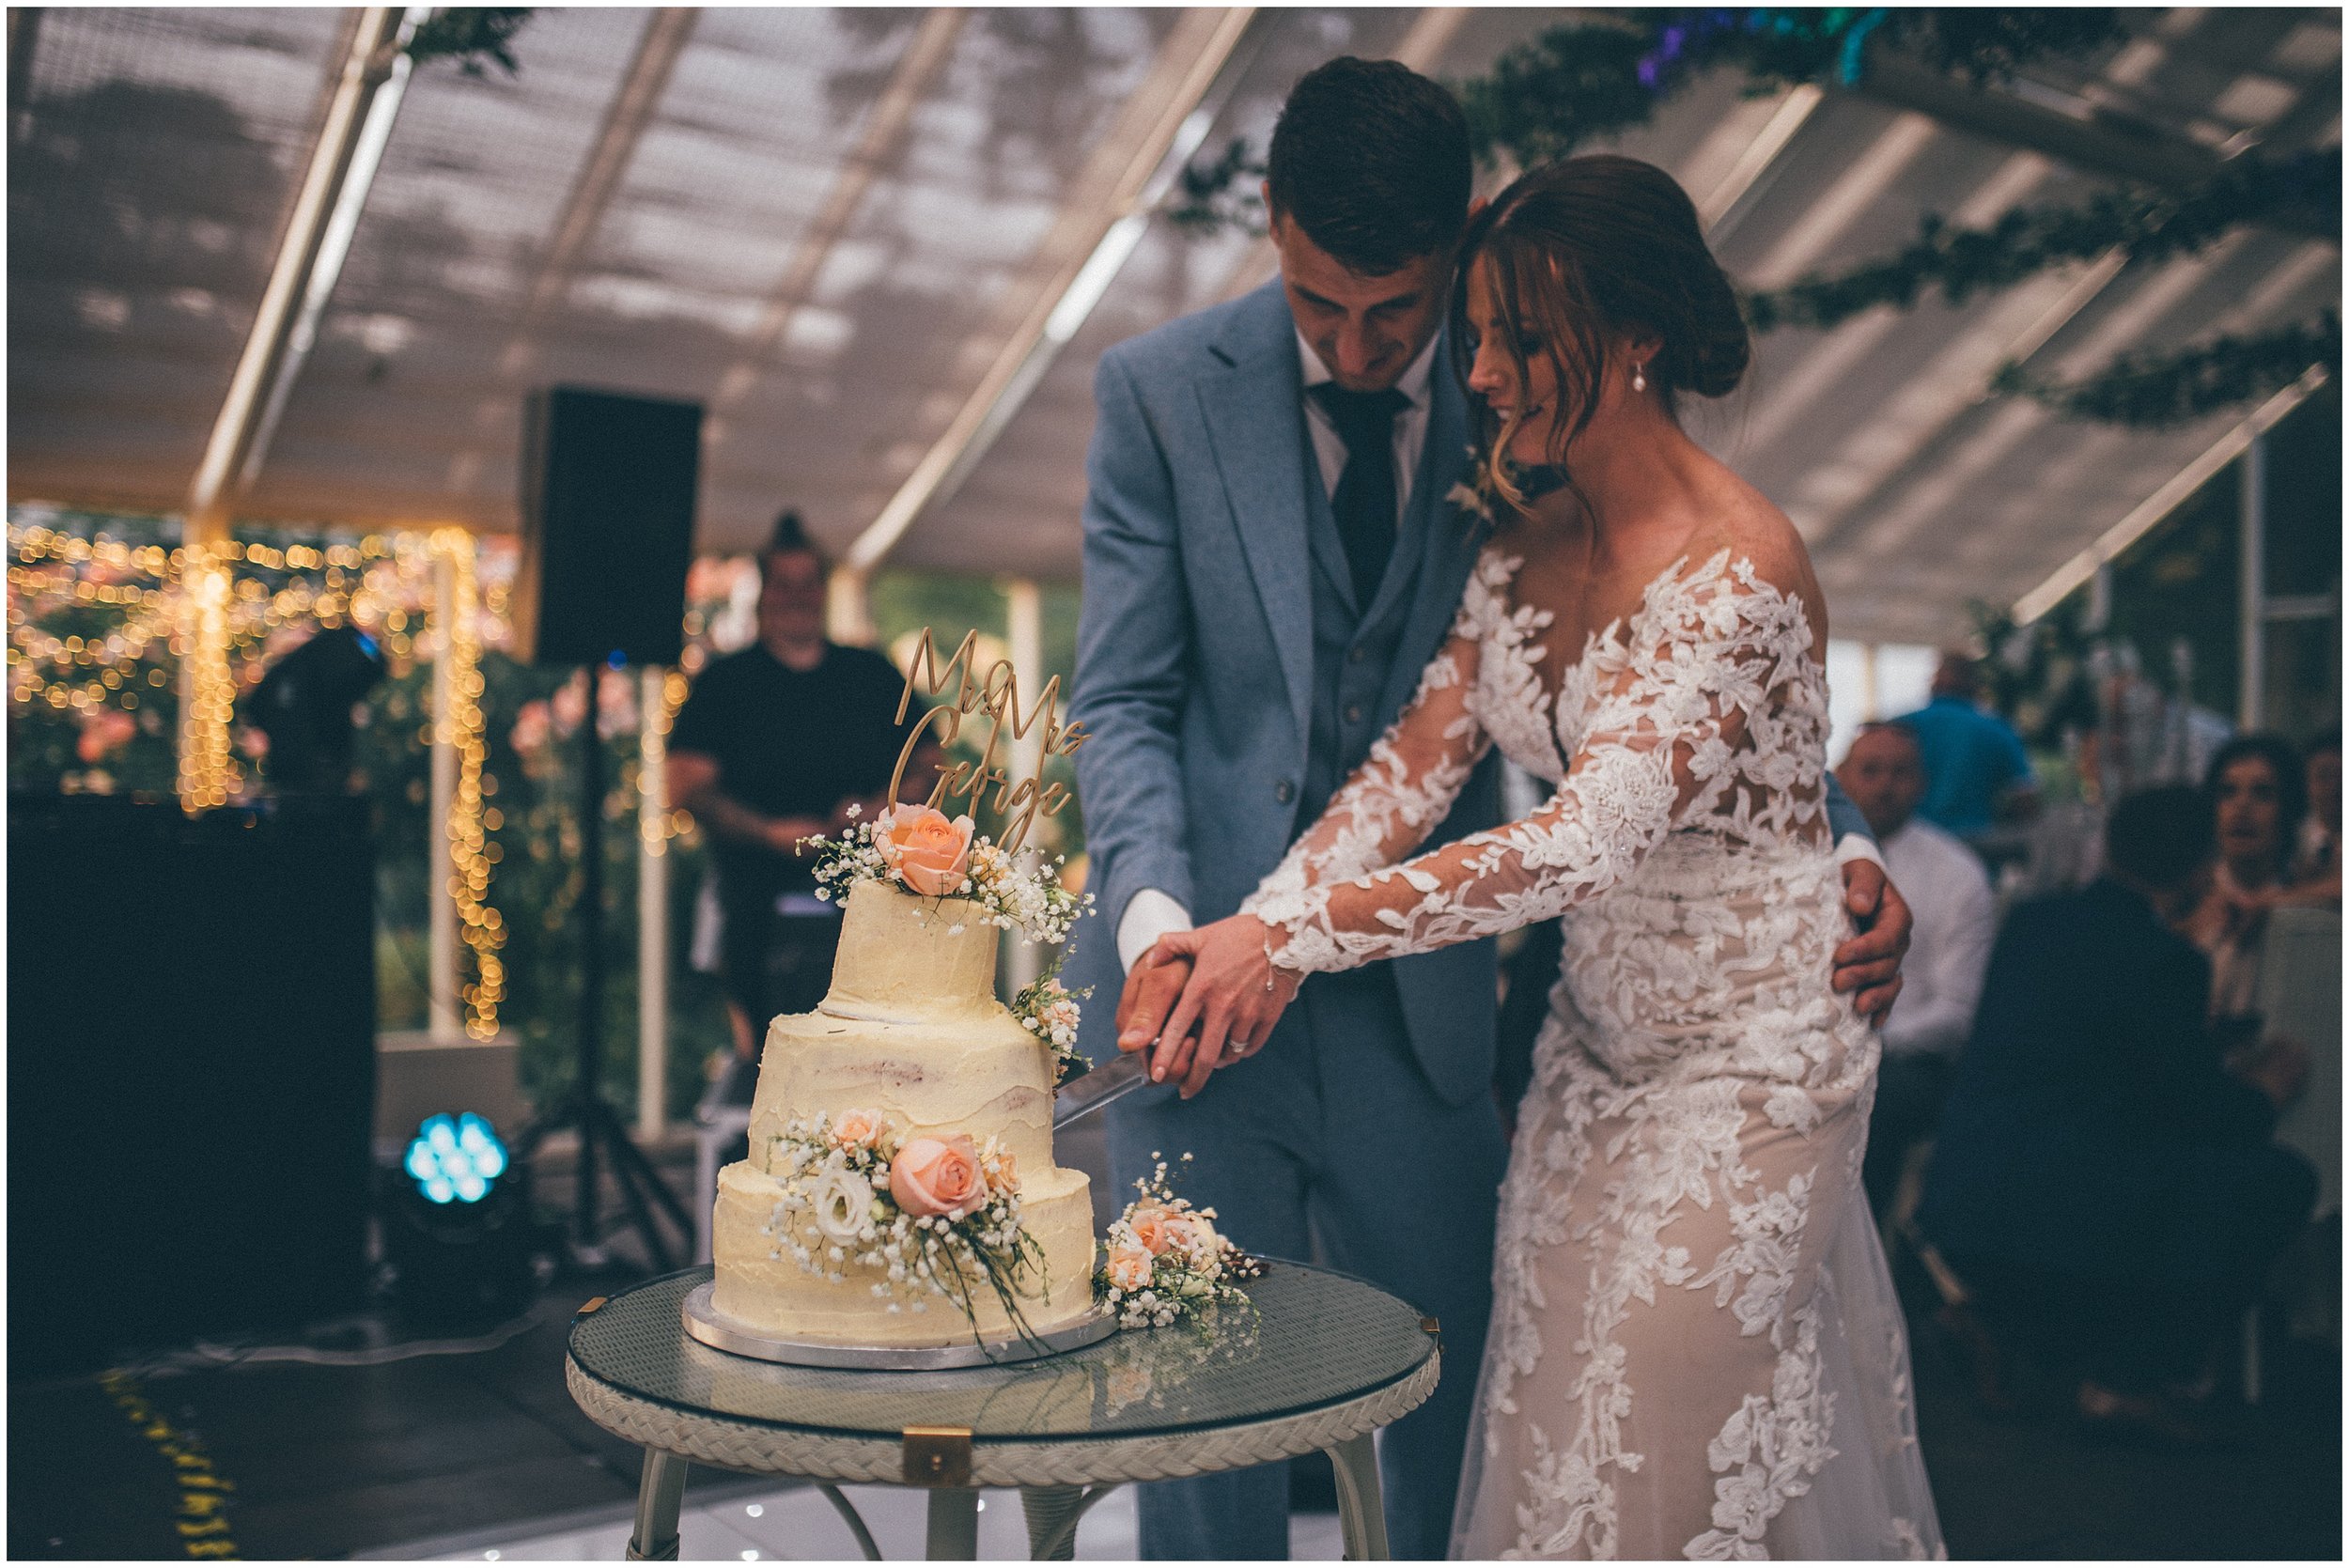 Bride and groom cut their wedding cake at Abbeywood Estate wedding venue in Delamere, Cheshire.